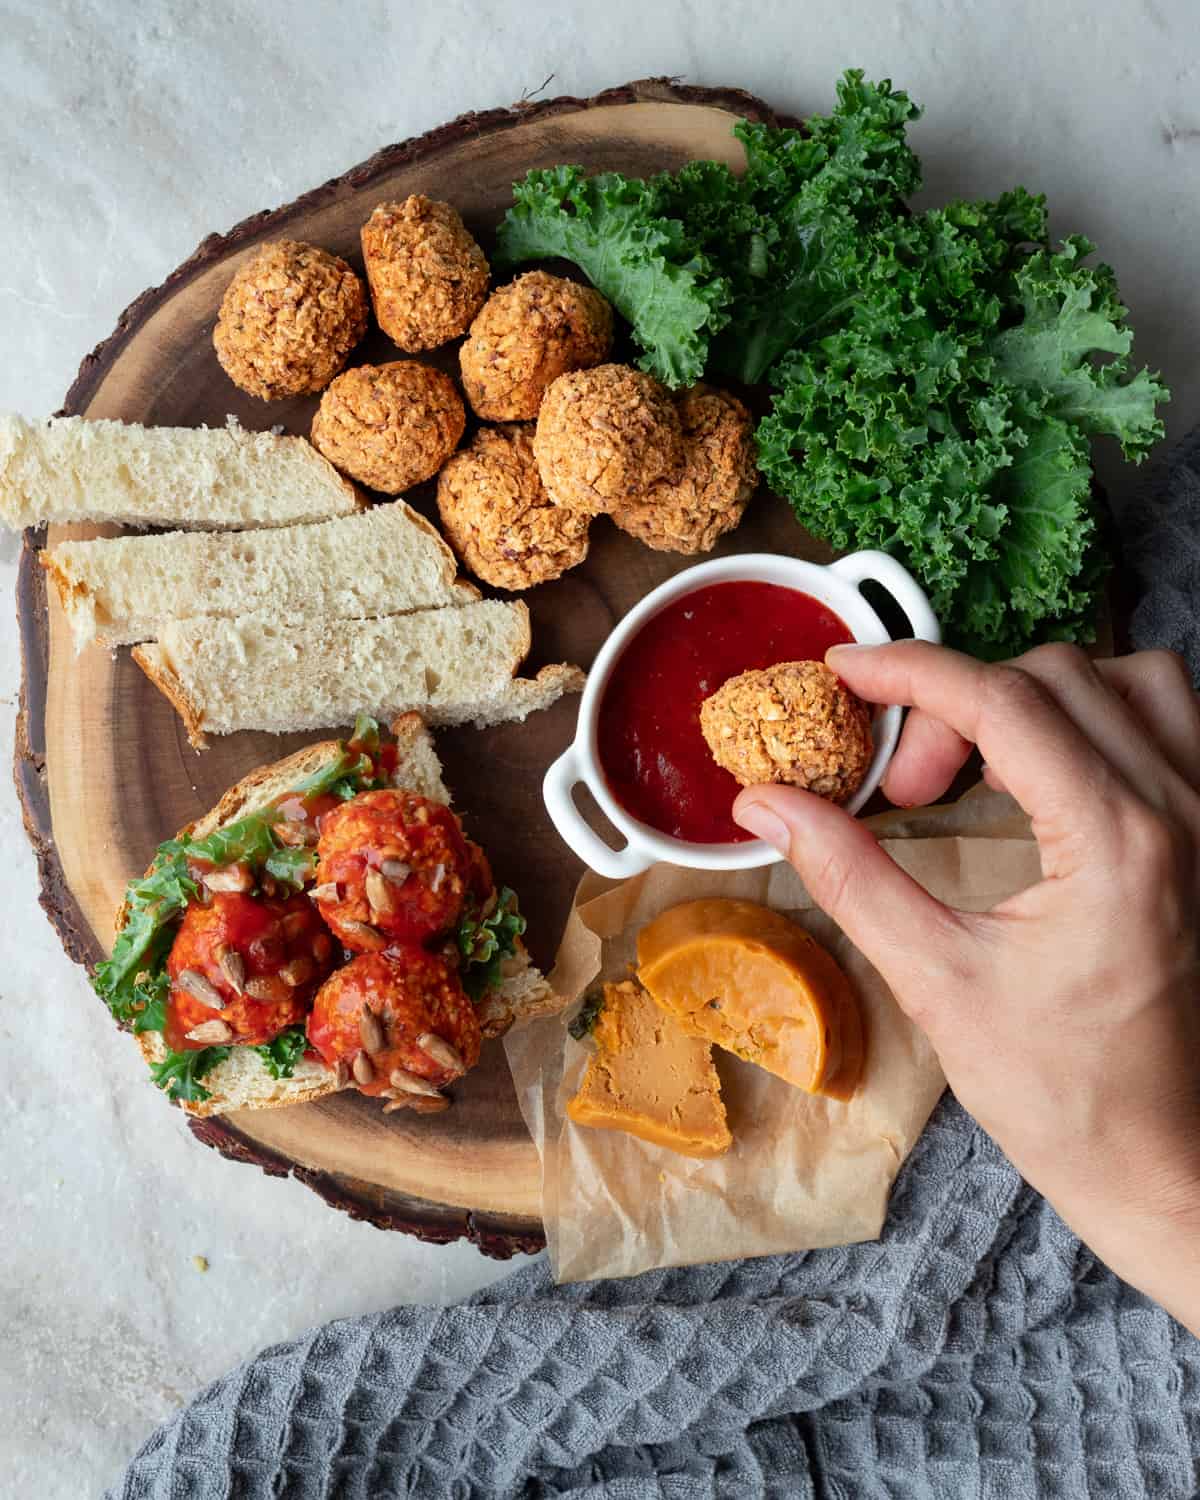 Top-down view of a cutting board full of vegan cheese, kale, toast, and vegan meatballs. There is a human hand dipping a meatball into a small bowl of tomato sauce at the center of the cutting board. There is a grey napkin at the bottom of the photo.